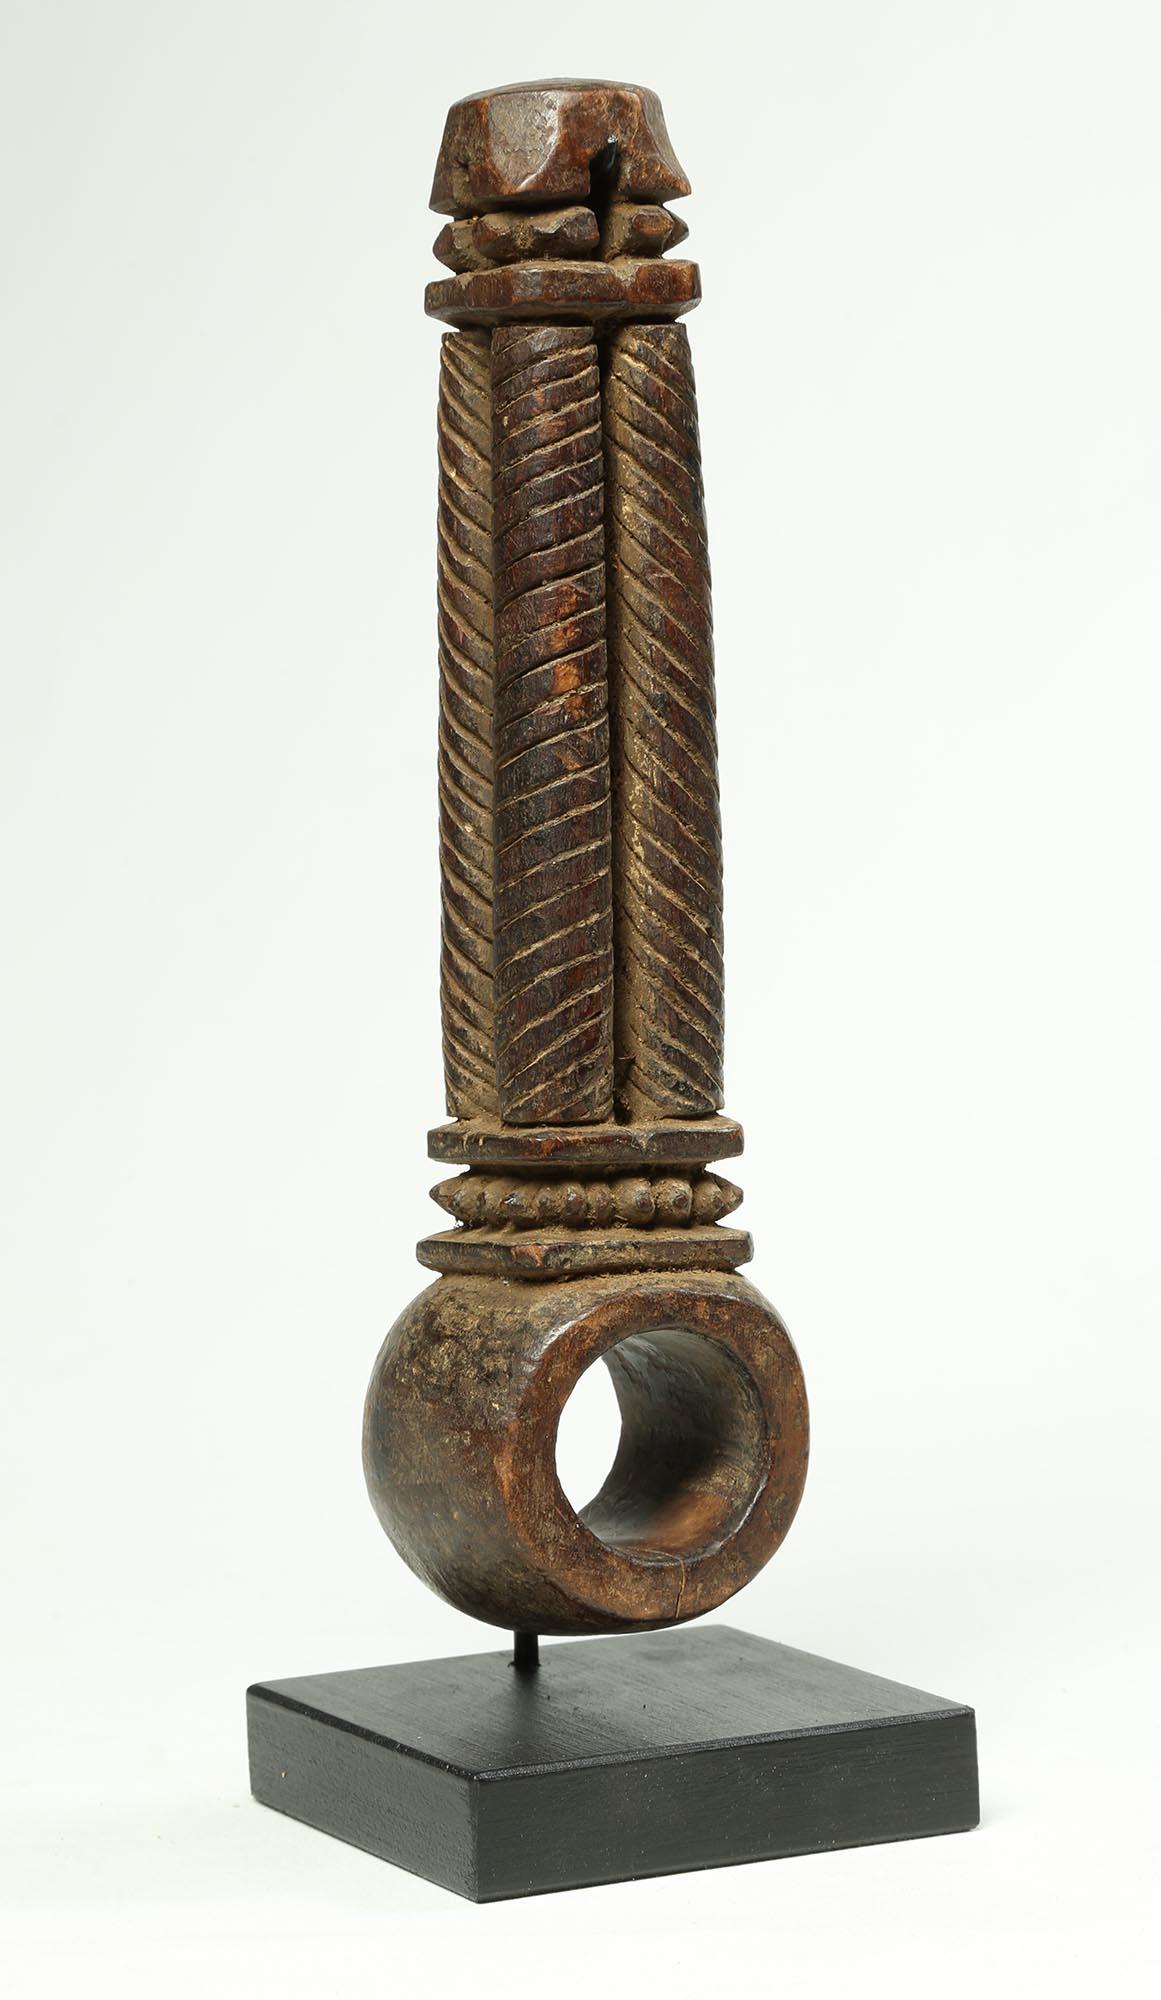 Tribal Nepal Himalayan Butter Churn Handle, Early 20th Century with Columns